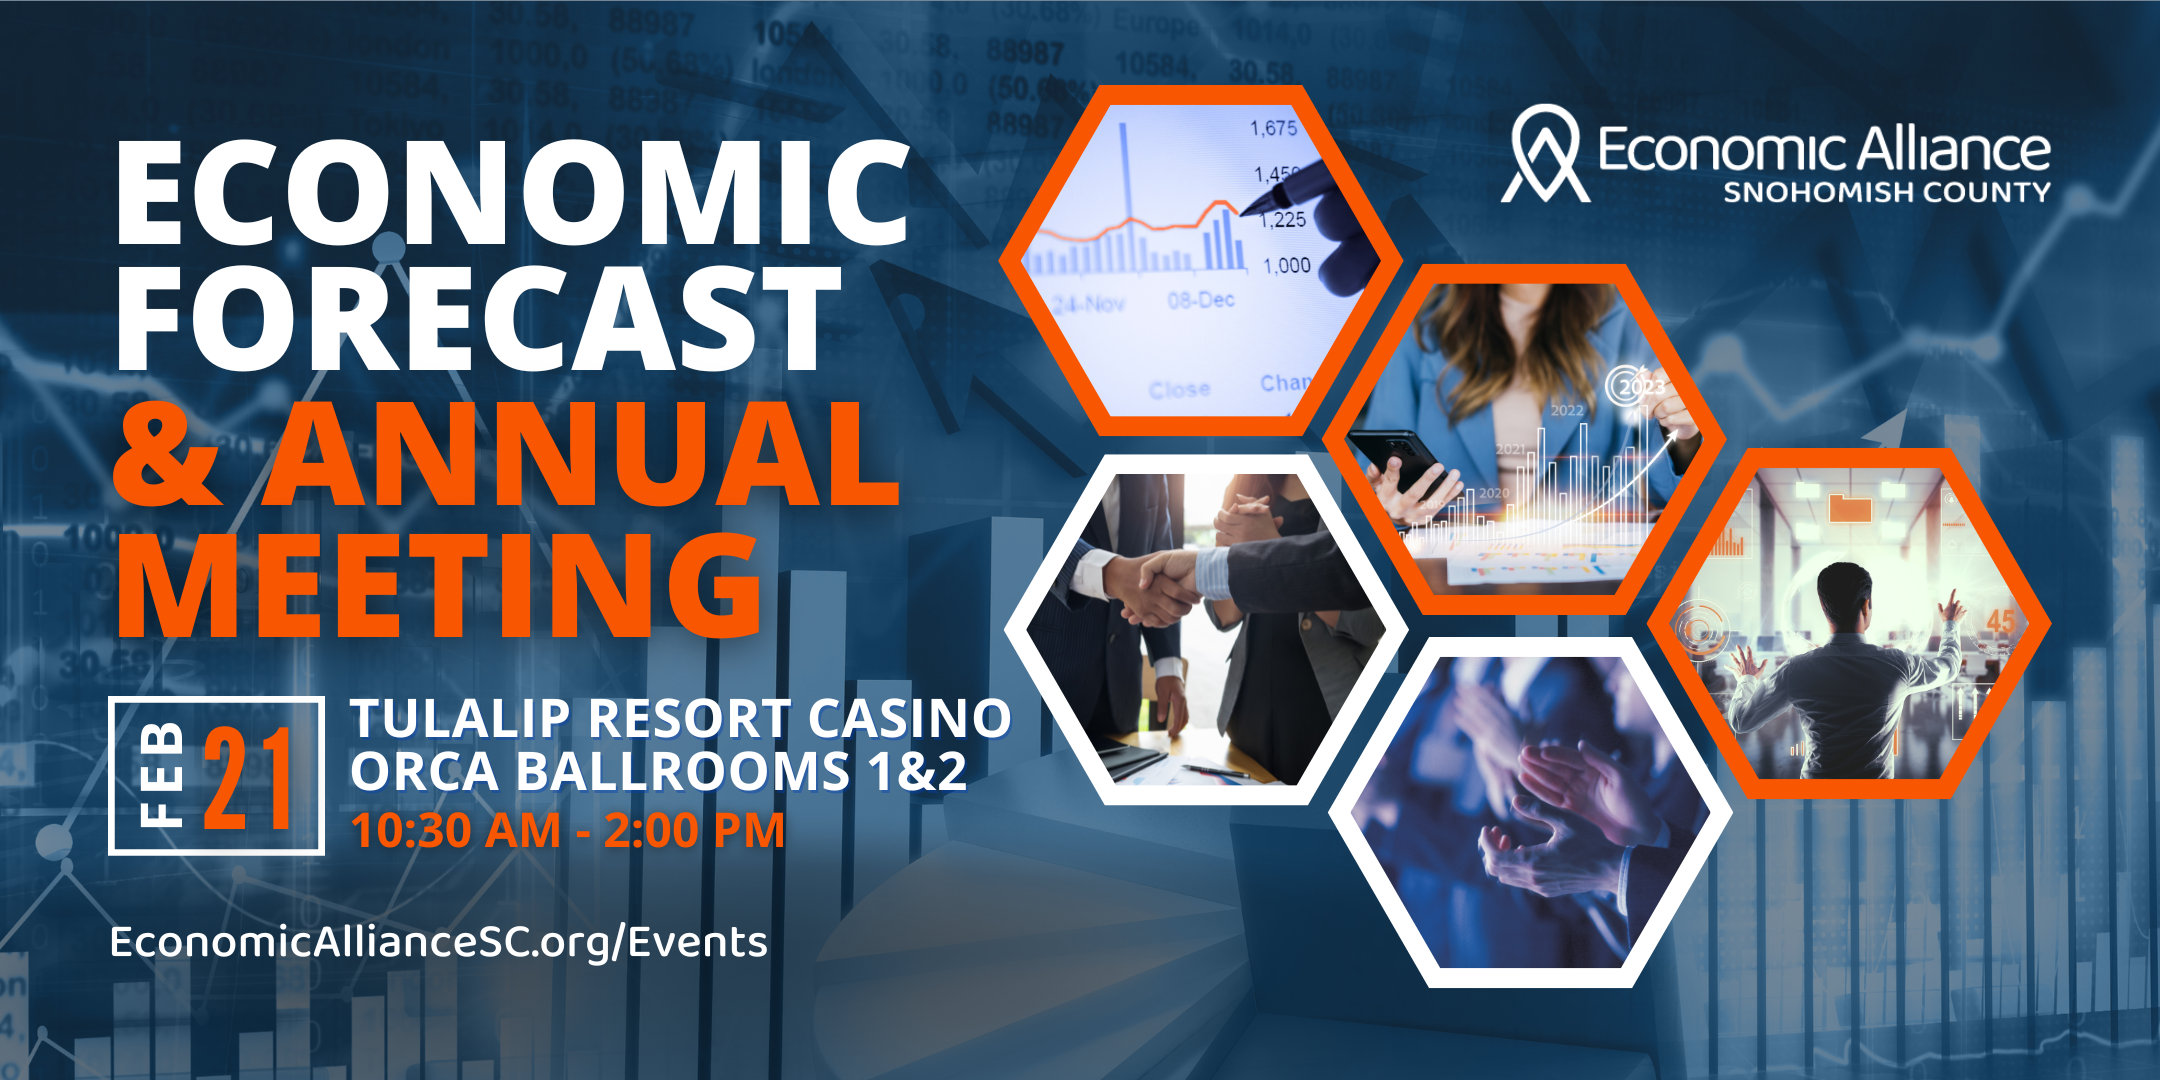 Event Promo Photo For Economic Forecast & Annual Meeting